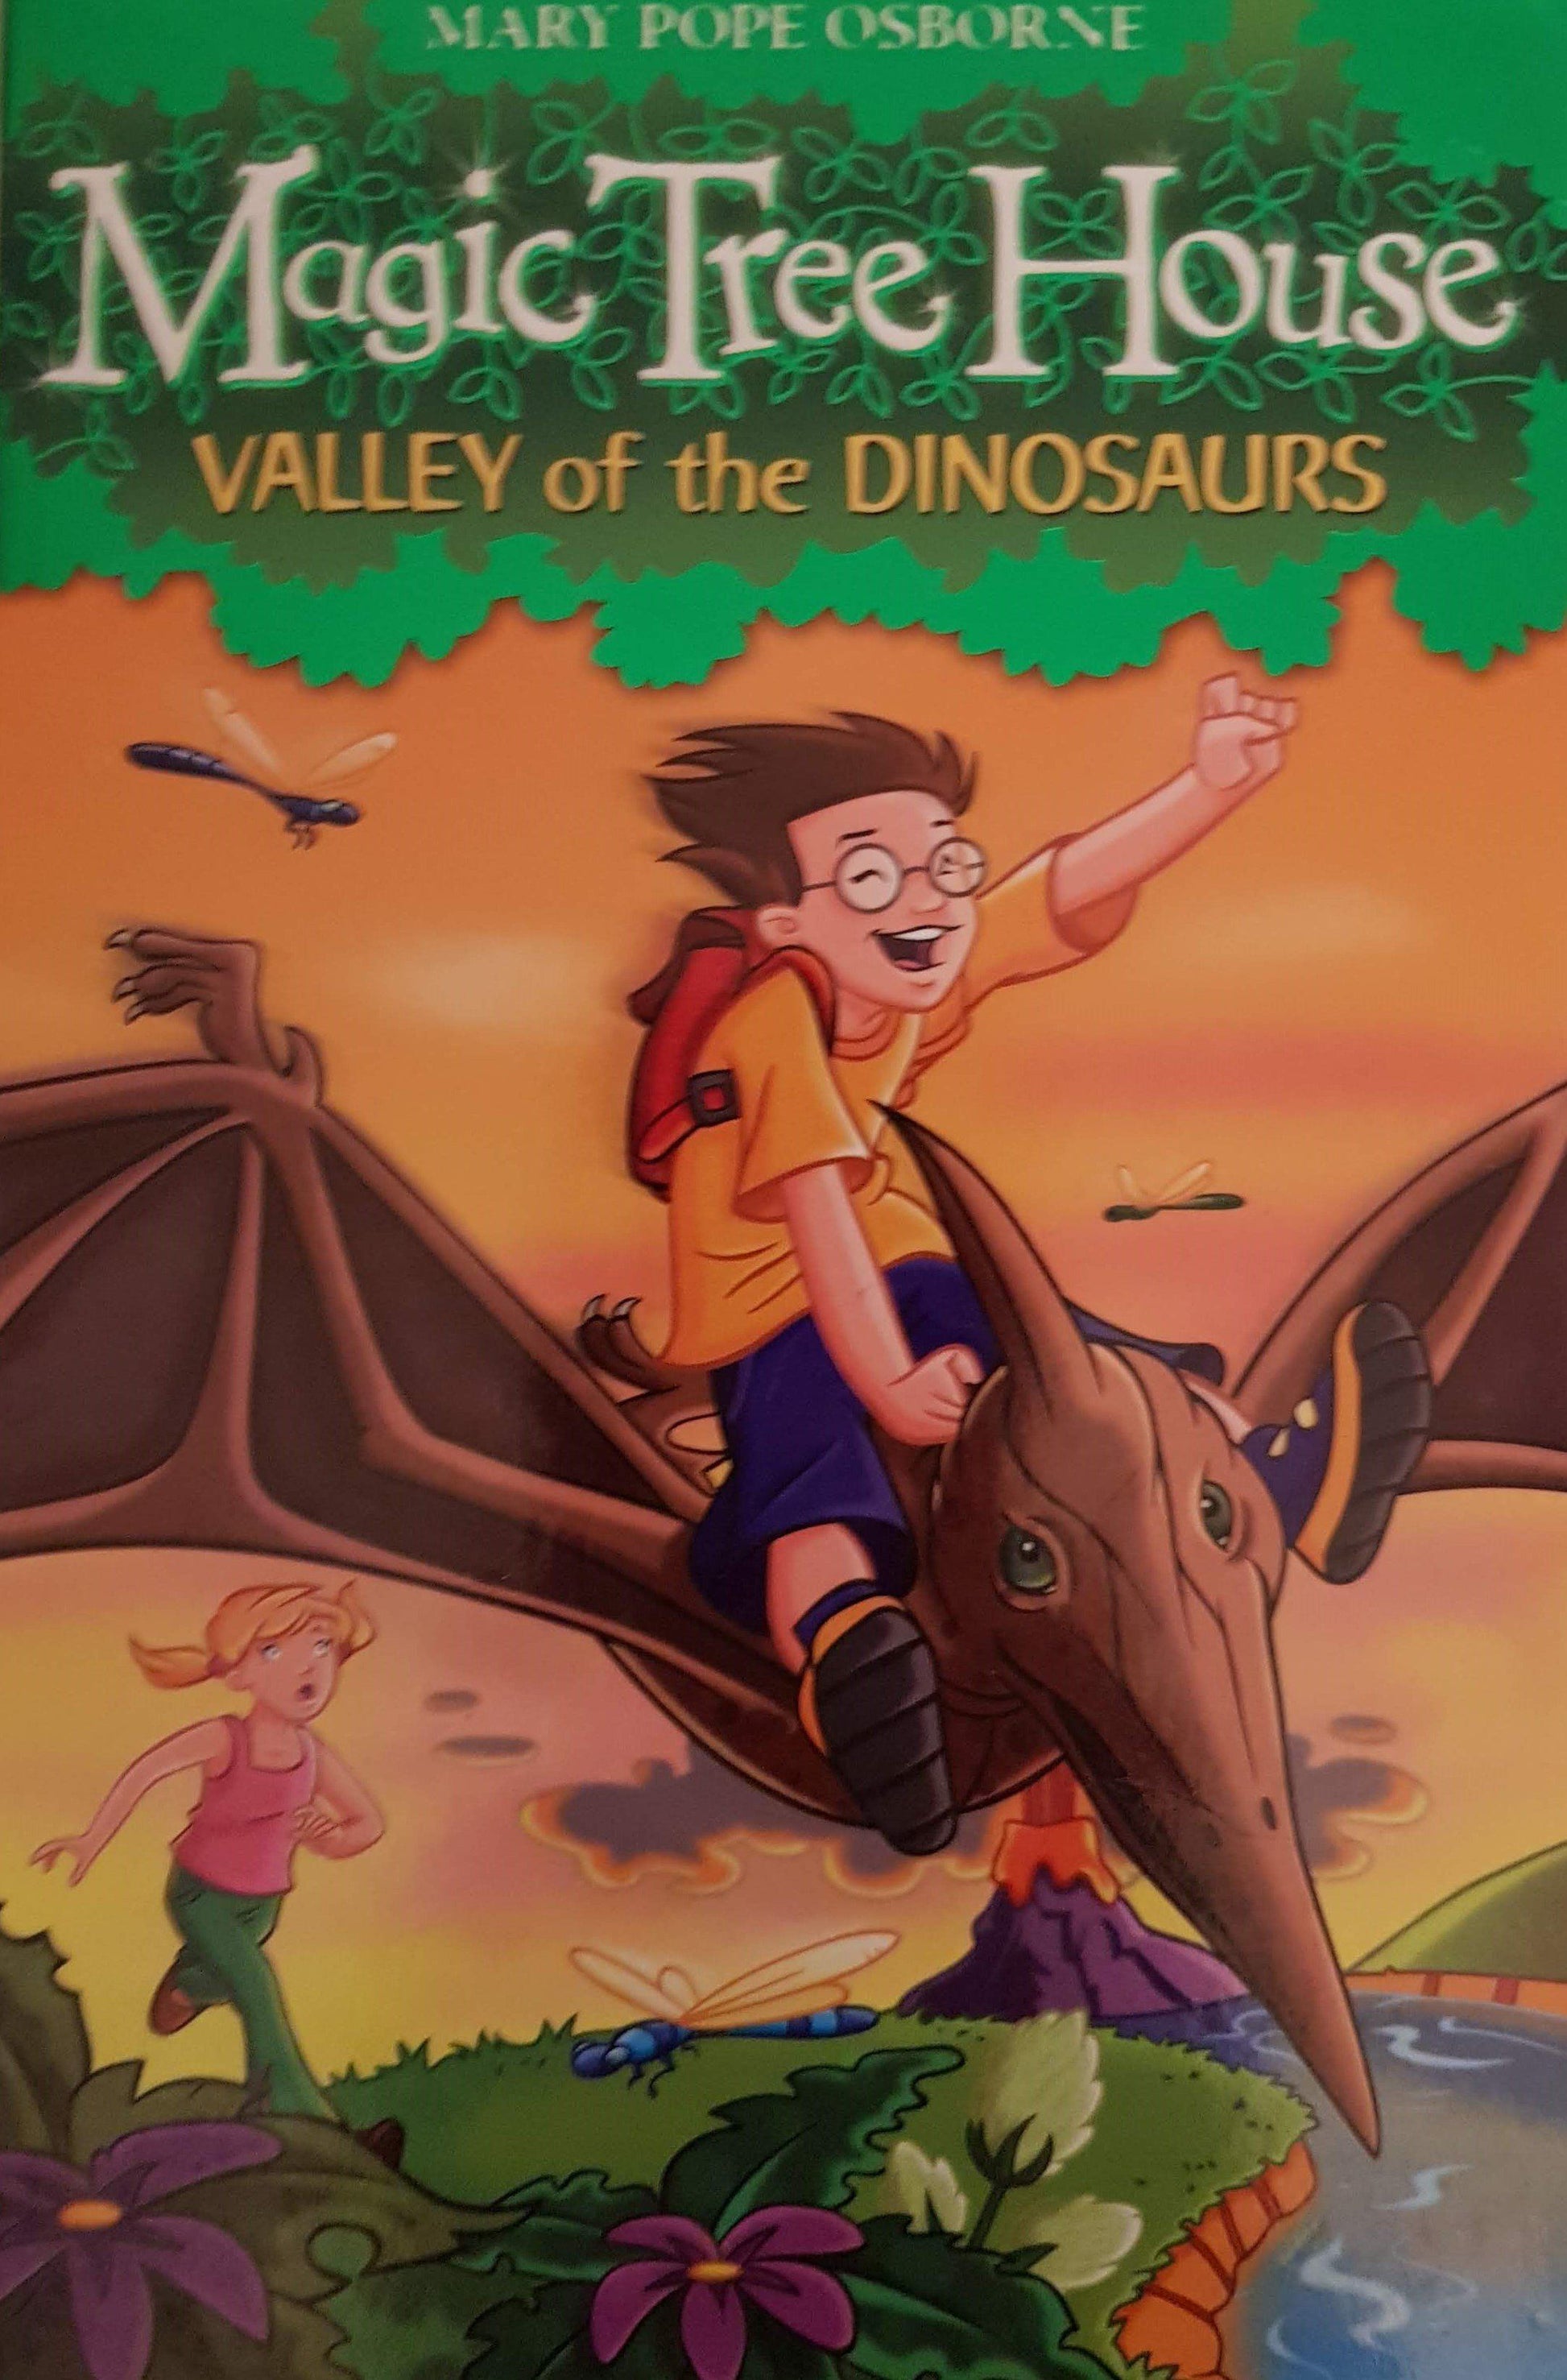 Valley of the Dinosaurs Like New Magic Tree House  (4621818757175)